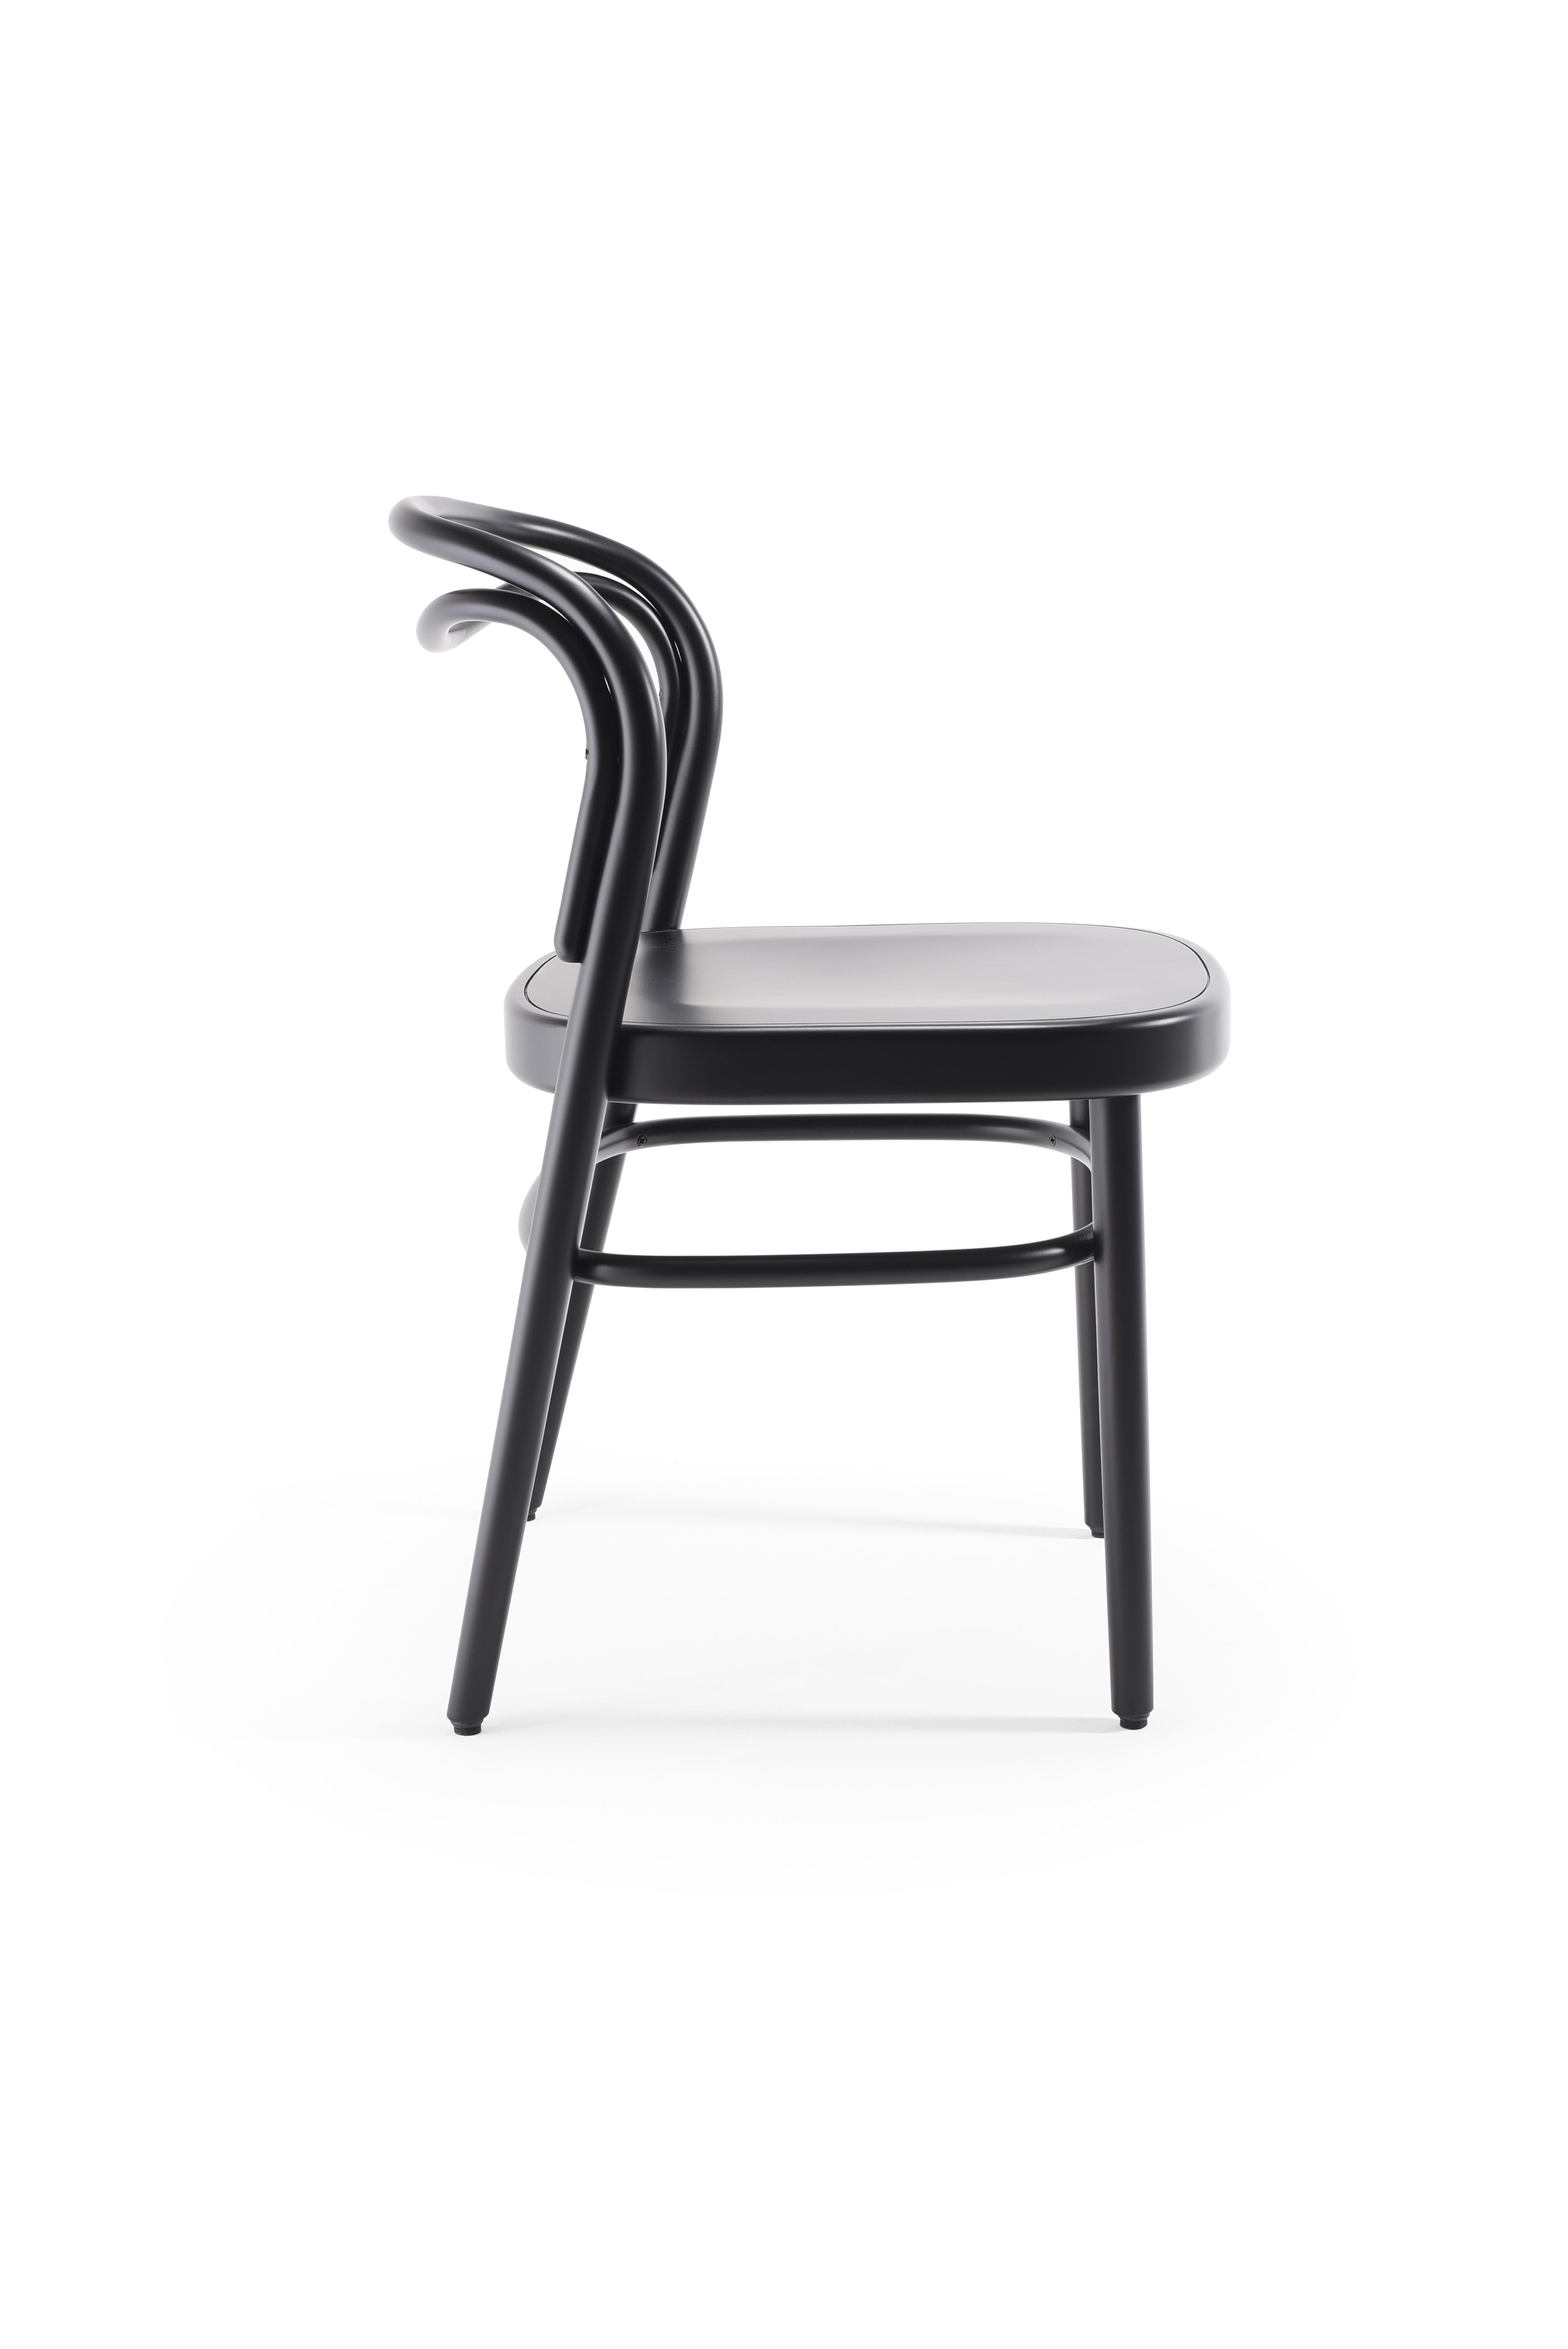 Gebrüder Thonet Vienna Beaulieu Chair with Plywood Seat by Philippe Nigro For Sale 2